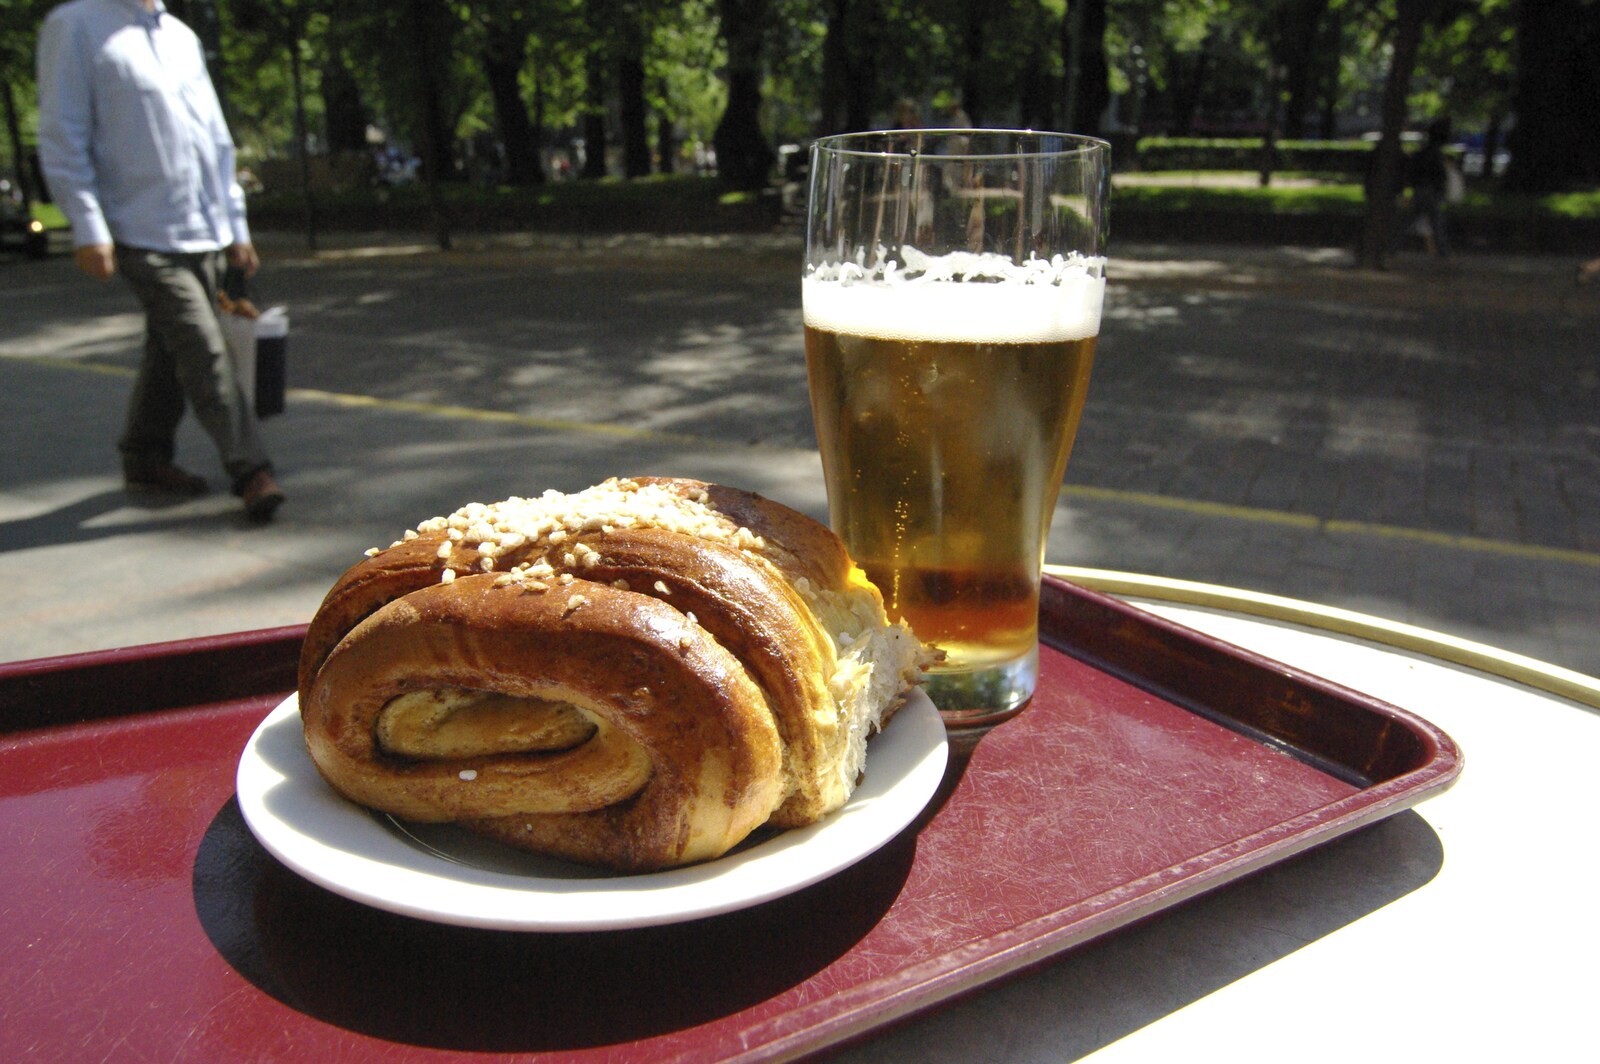 Genesis in Concert, and Suomenlinna, Helsinki, Finland - 11th June 2007: We have a beer and some massive pastries